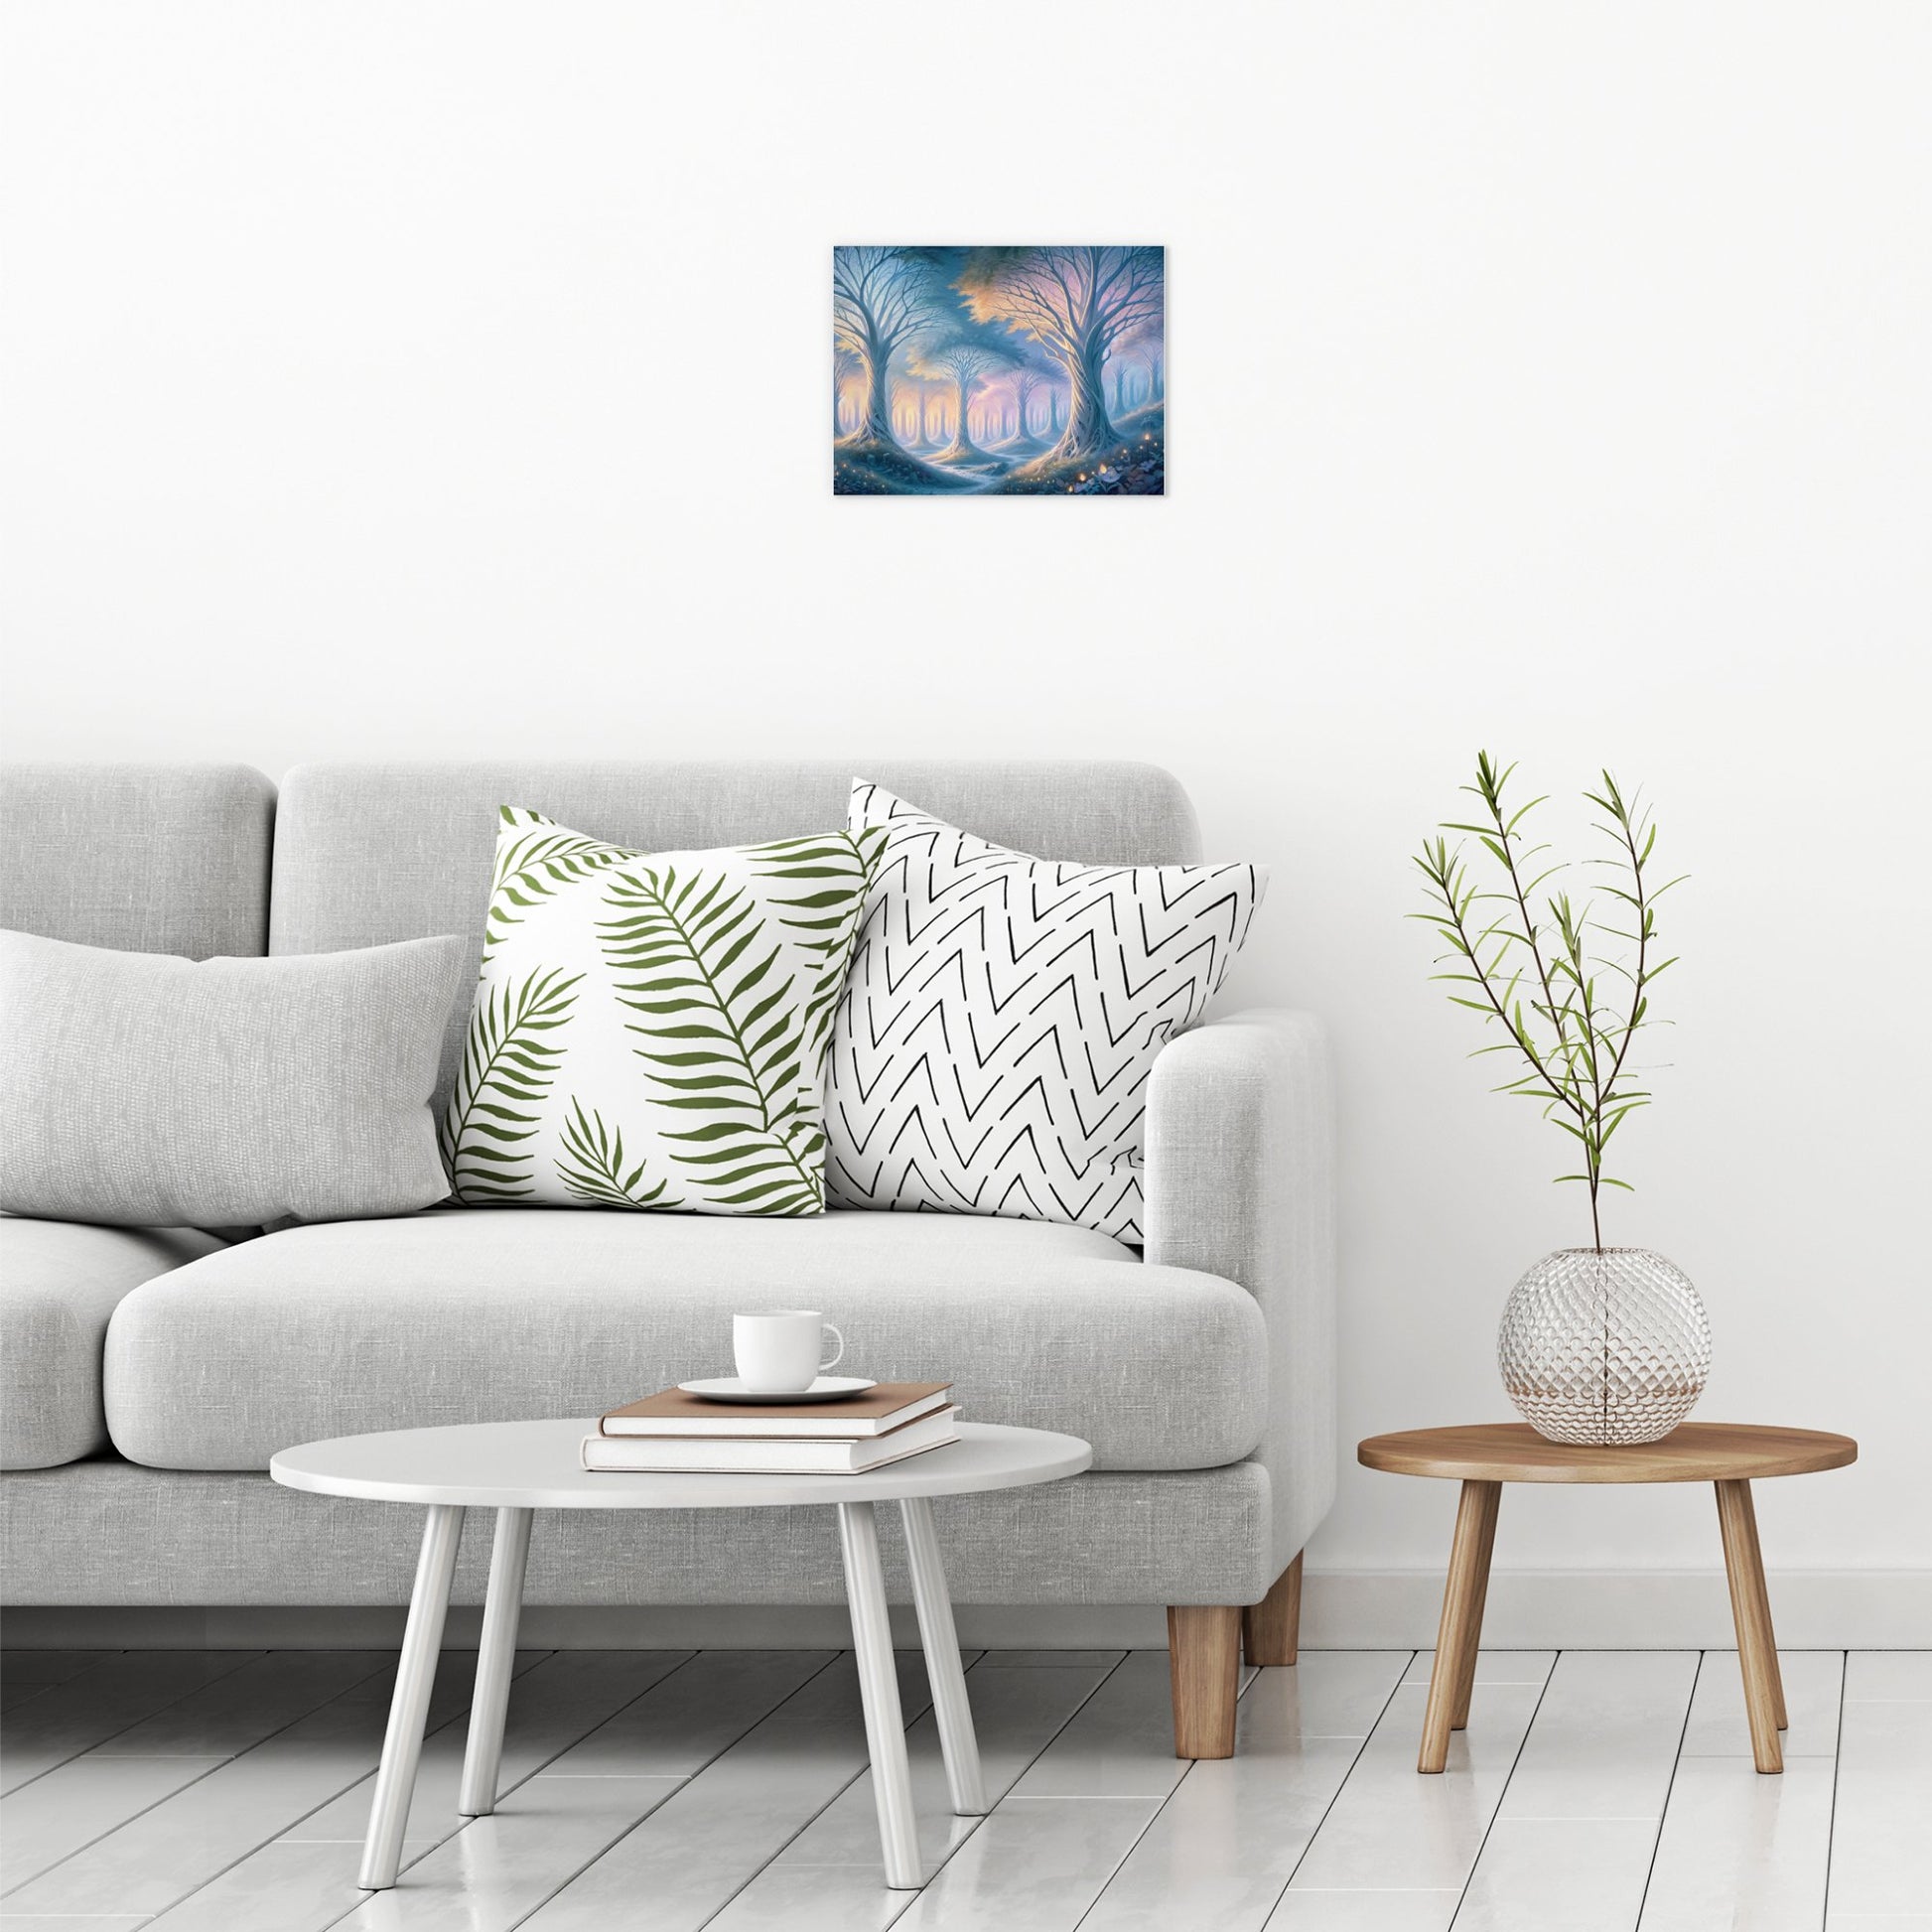 A contemporary modern room view showing a small size metal art poster display plate with printed design of a Mystical Forest